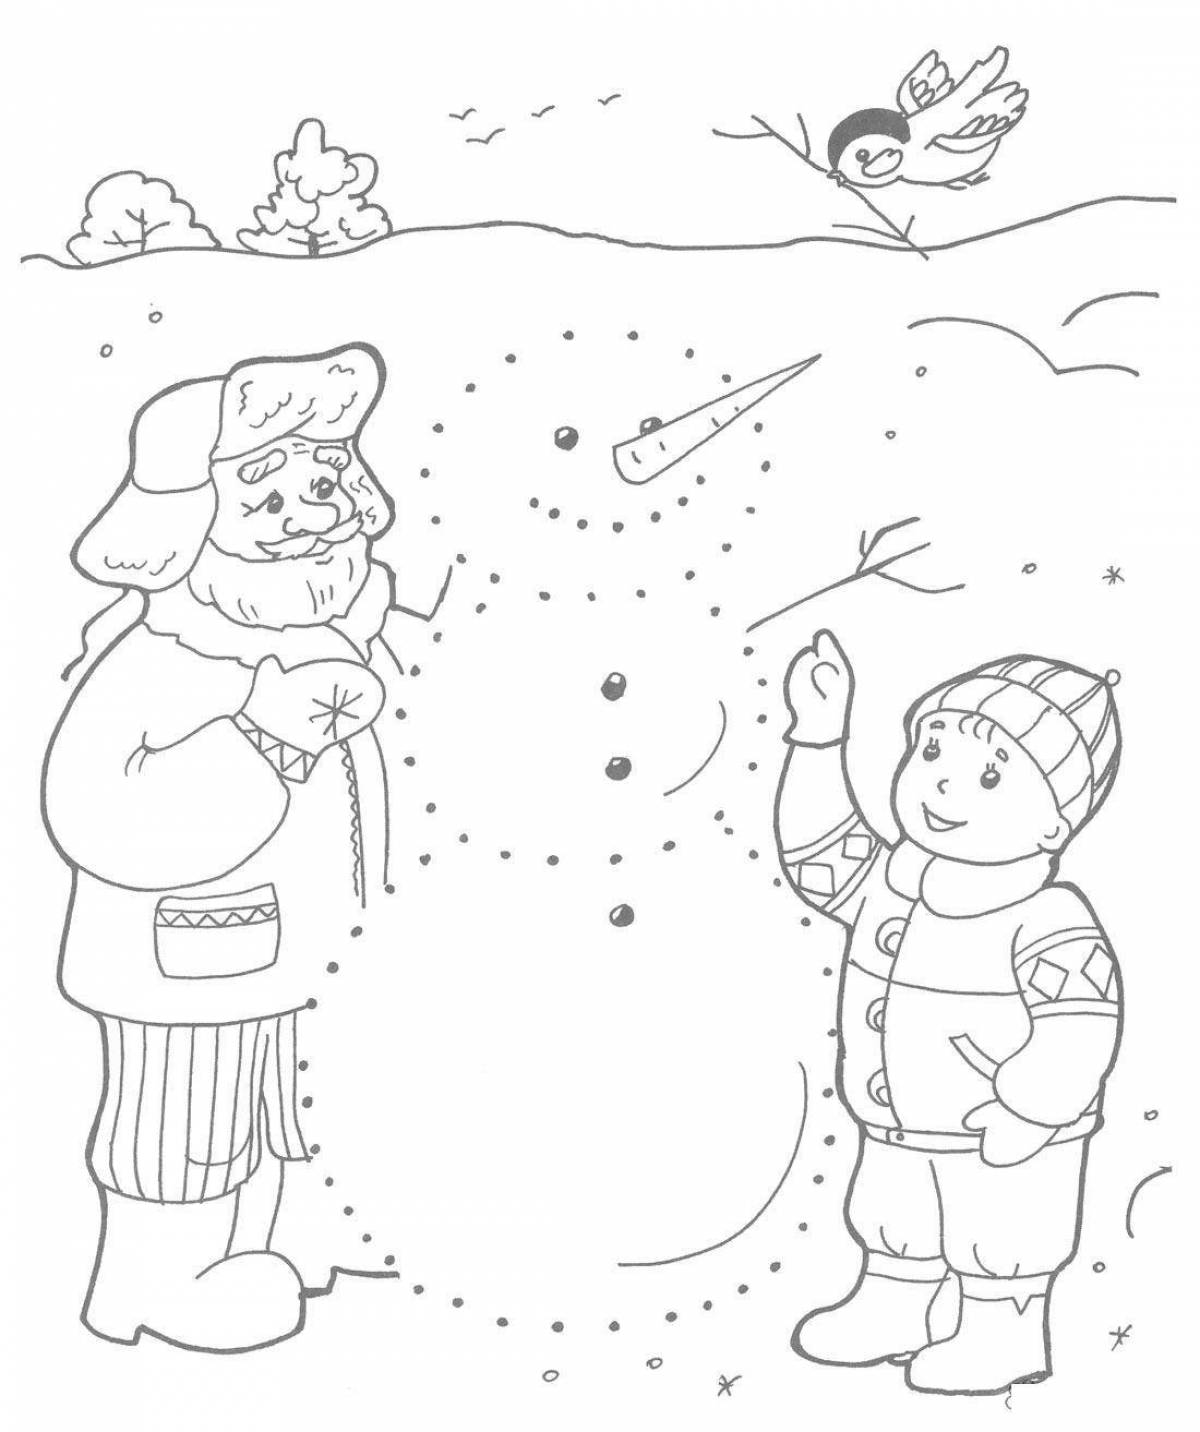 Funny coloring book for children winter fun 5-6 years old